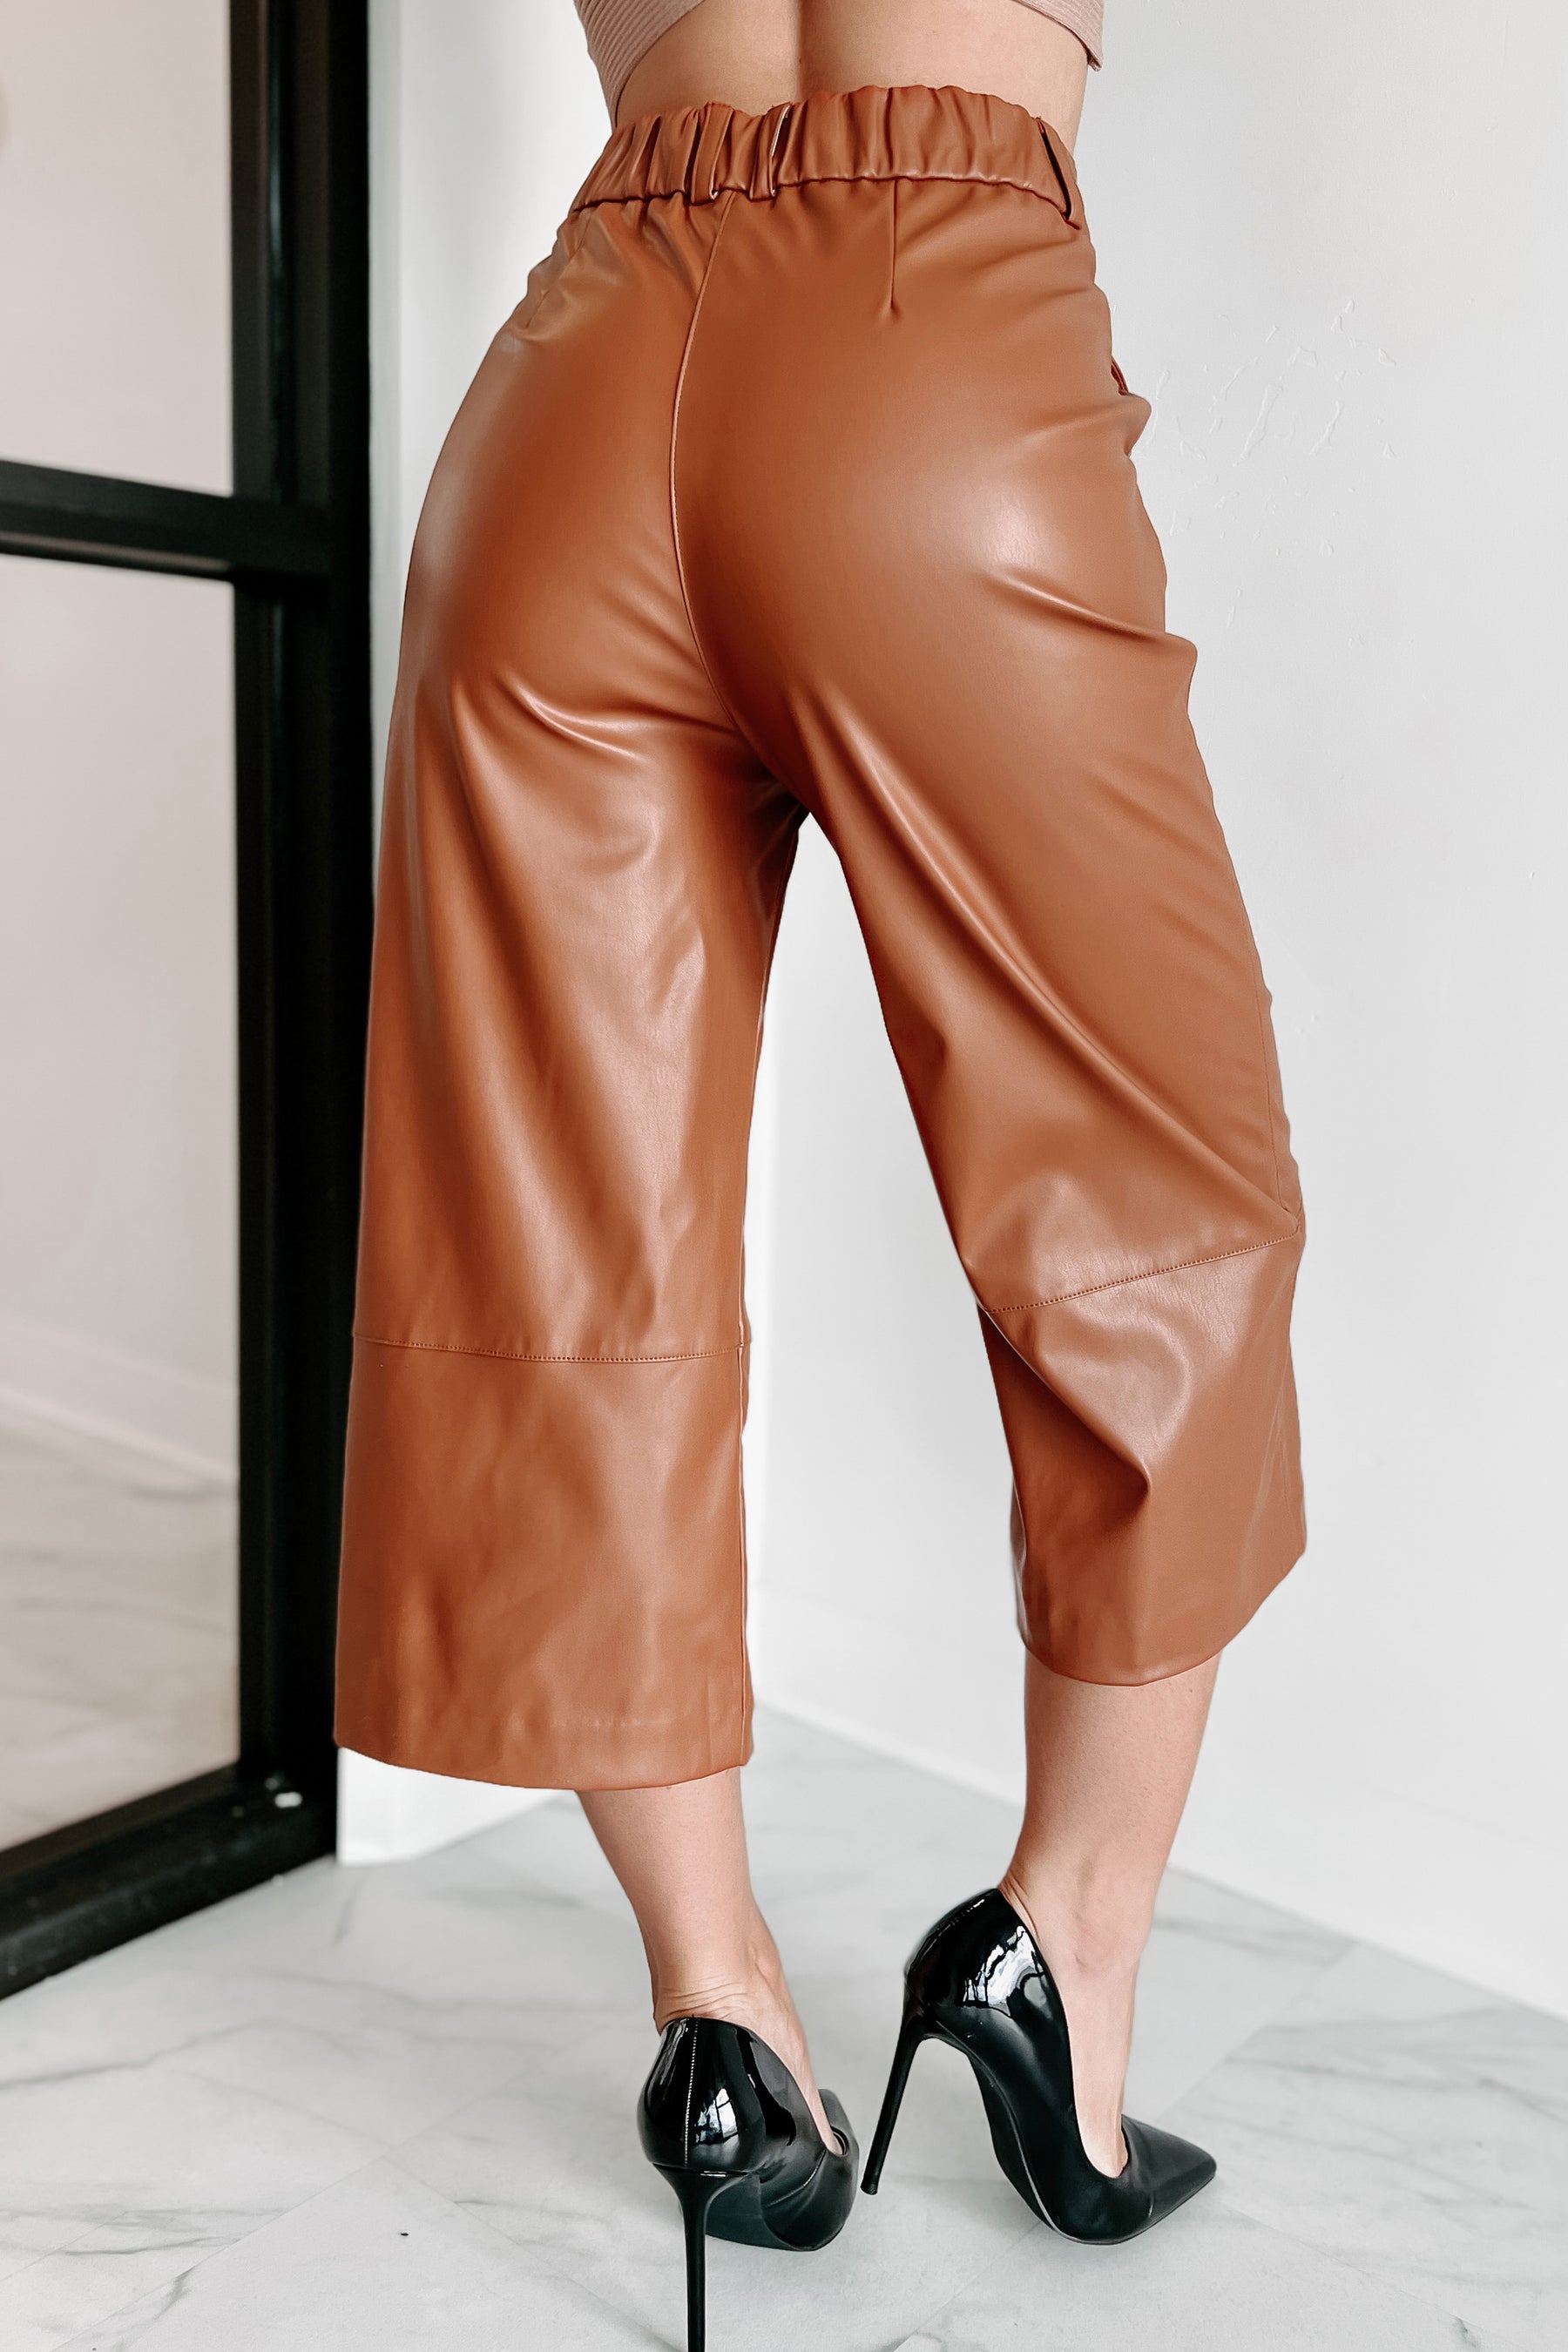 Not Your Usual Type Faux Leather Crop Pants (Brown) - NanaMacs